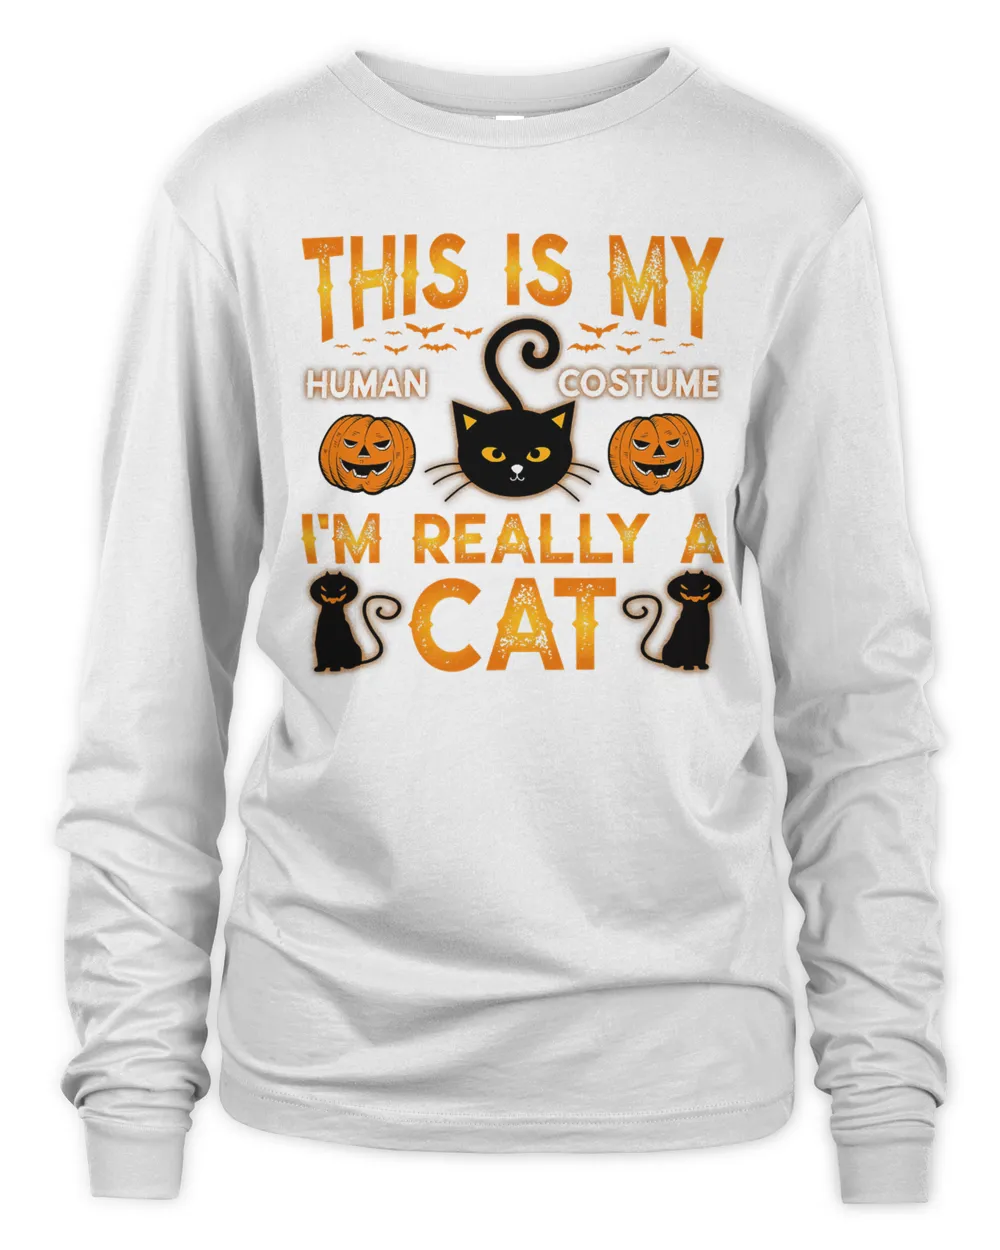 This Is My Human Costume I'm Really A Cat for Halloween T-Shirt